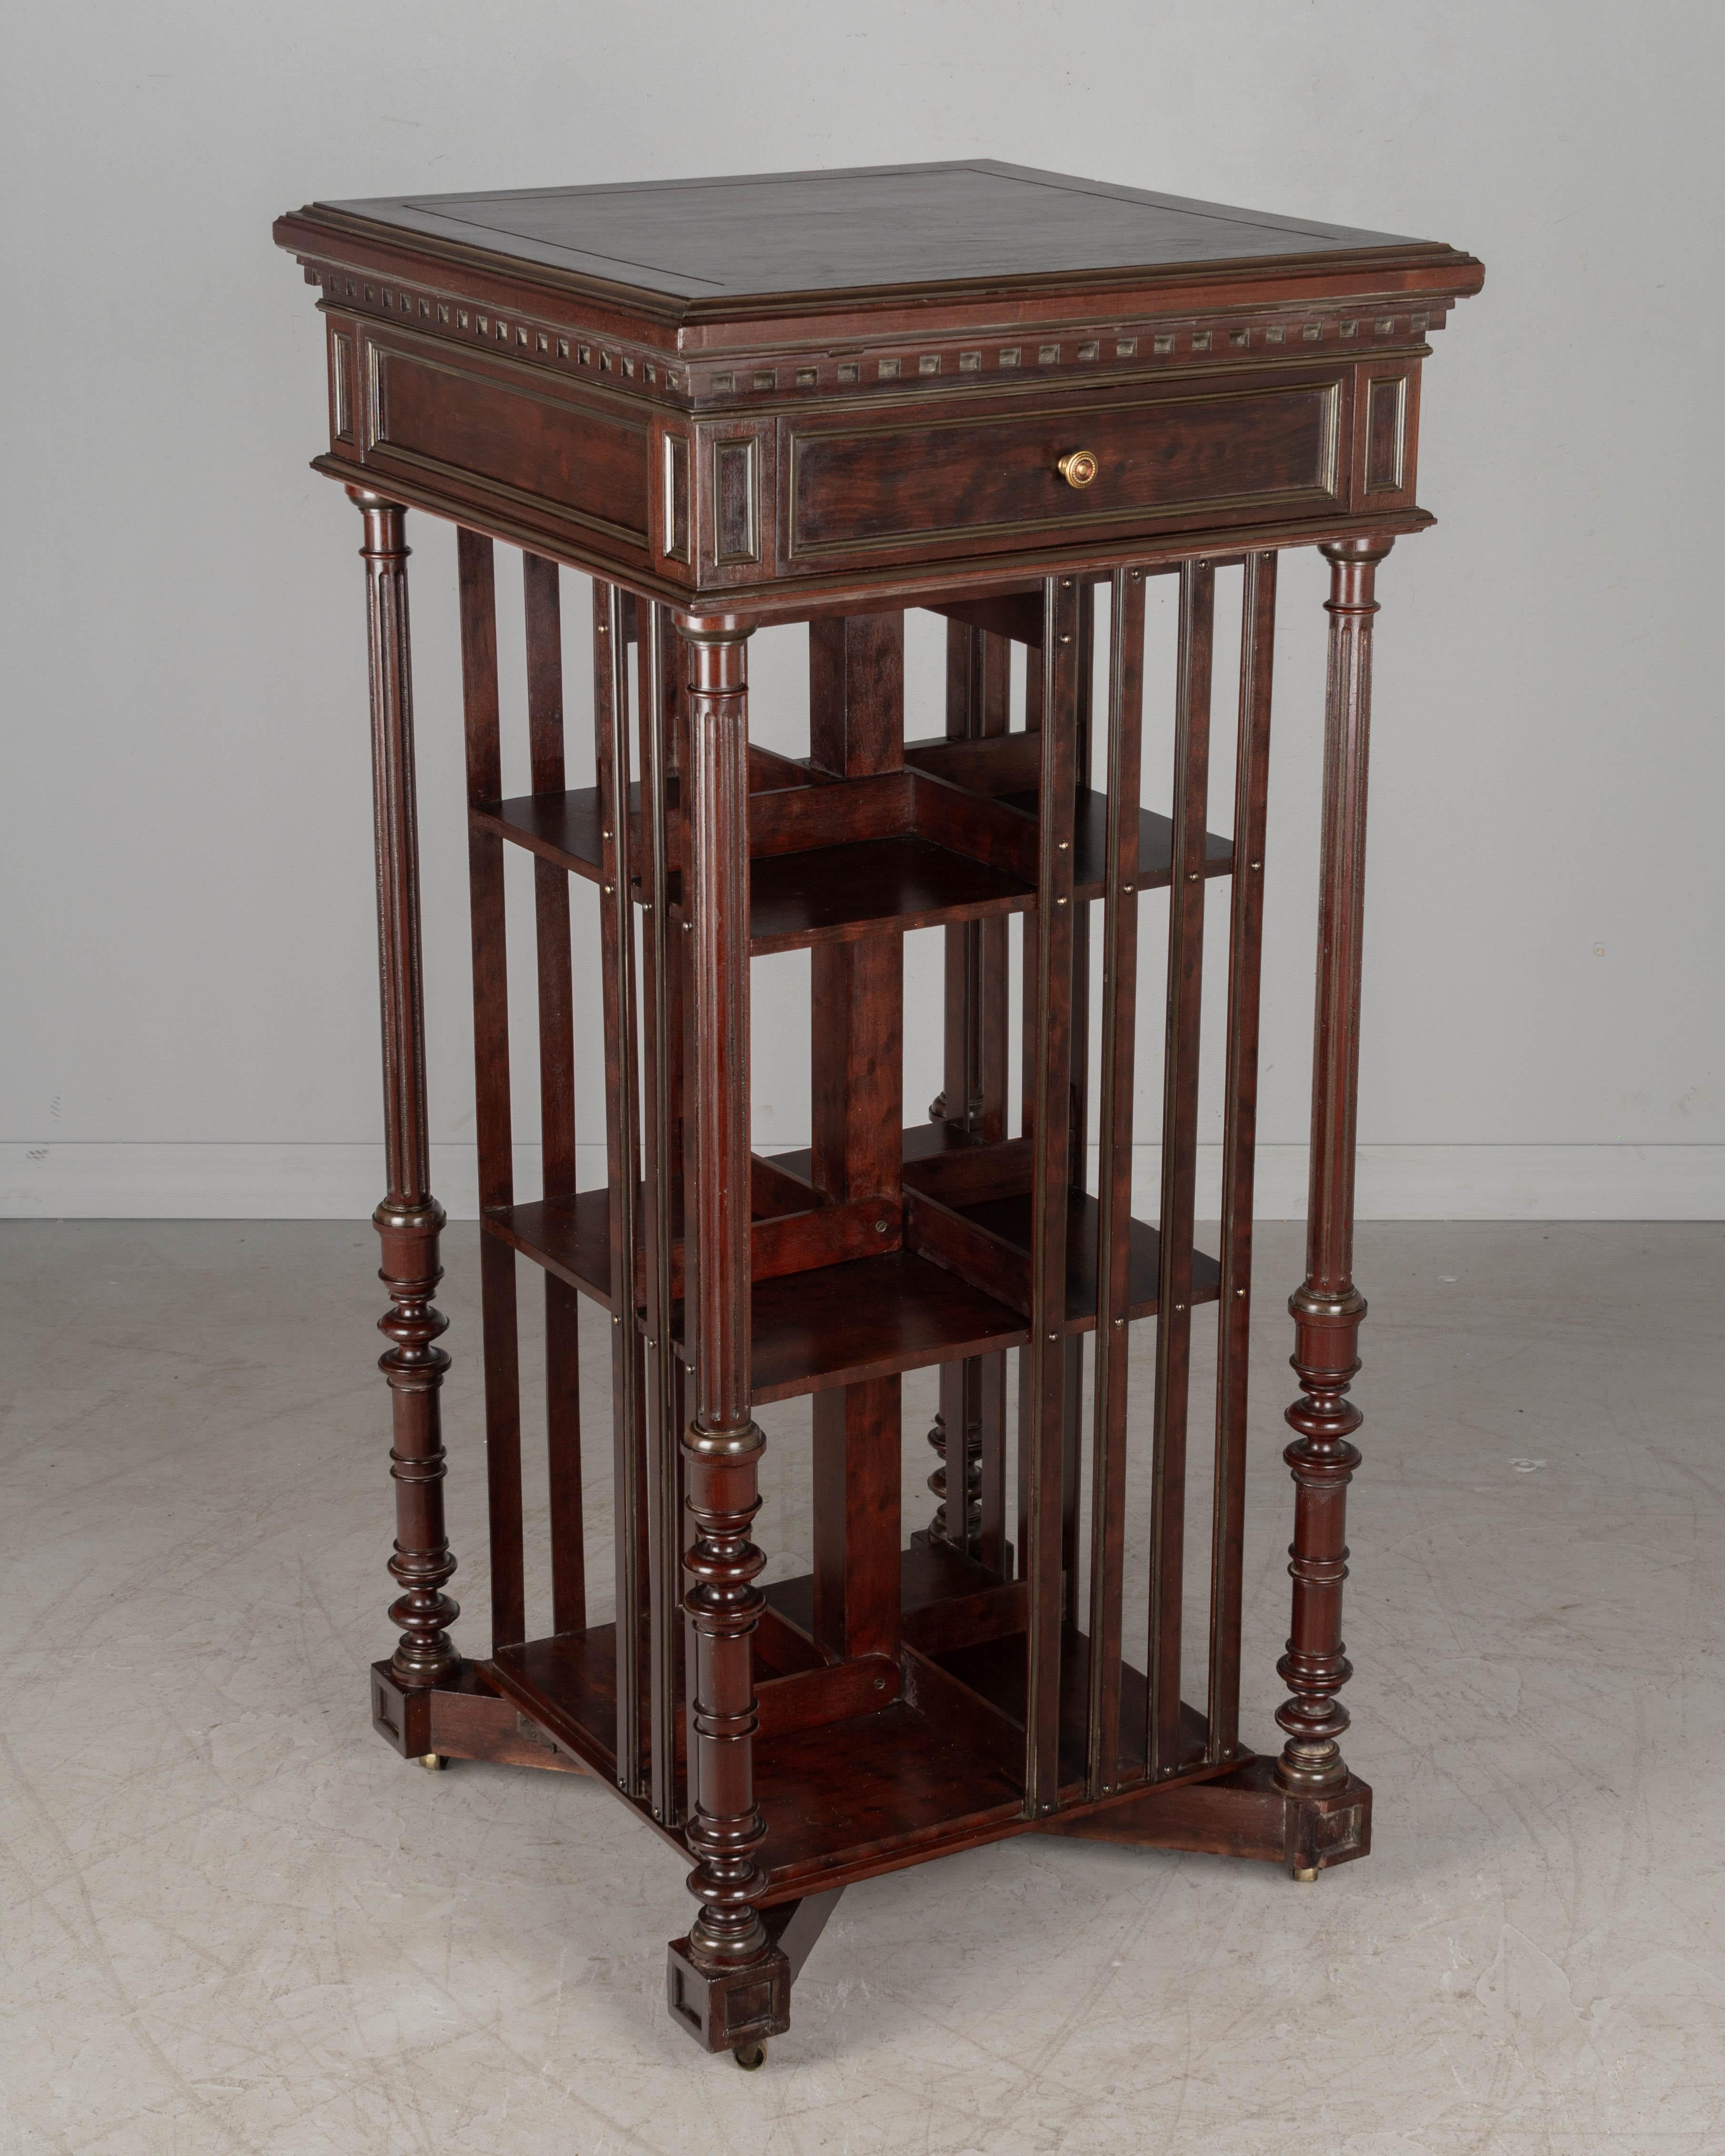 A French bibliotheque tournante, or revolving bookcase made by Terquem, Paris. Made of solid mahogany with brass inlay trim, this bookcase has three shelves with adjustable dividers to accommodate books of various sizes. The top is an adjustable